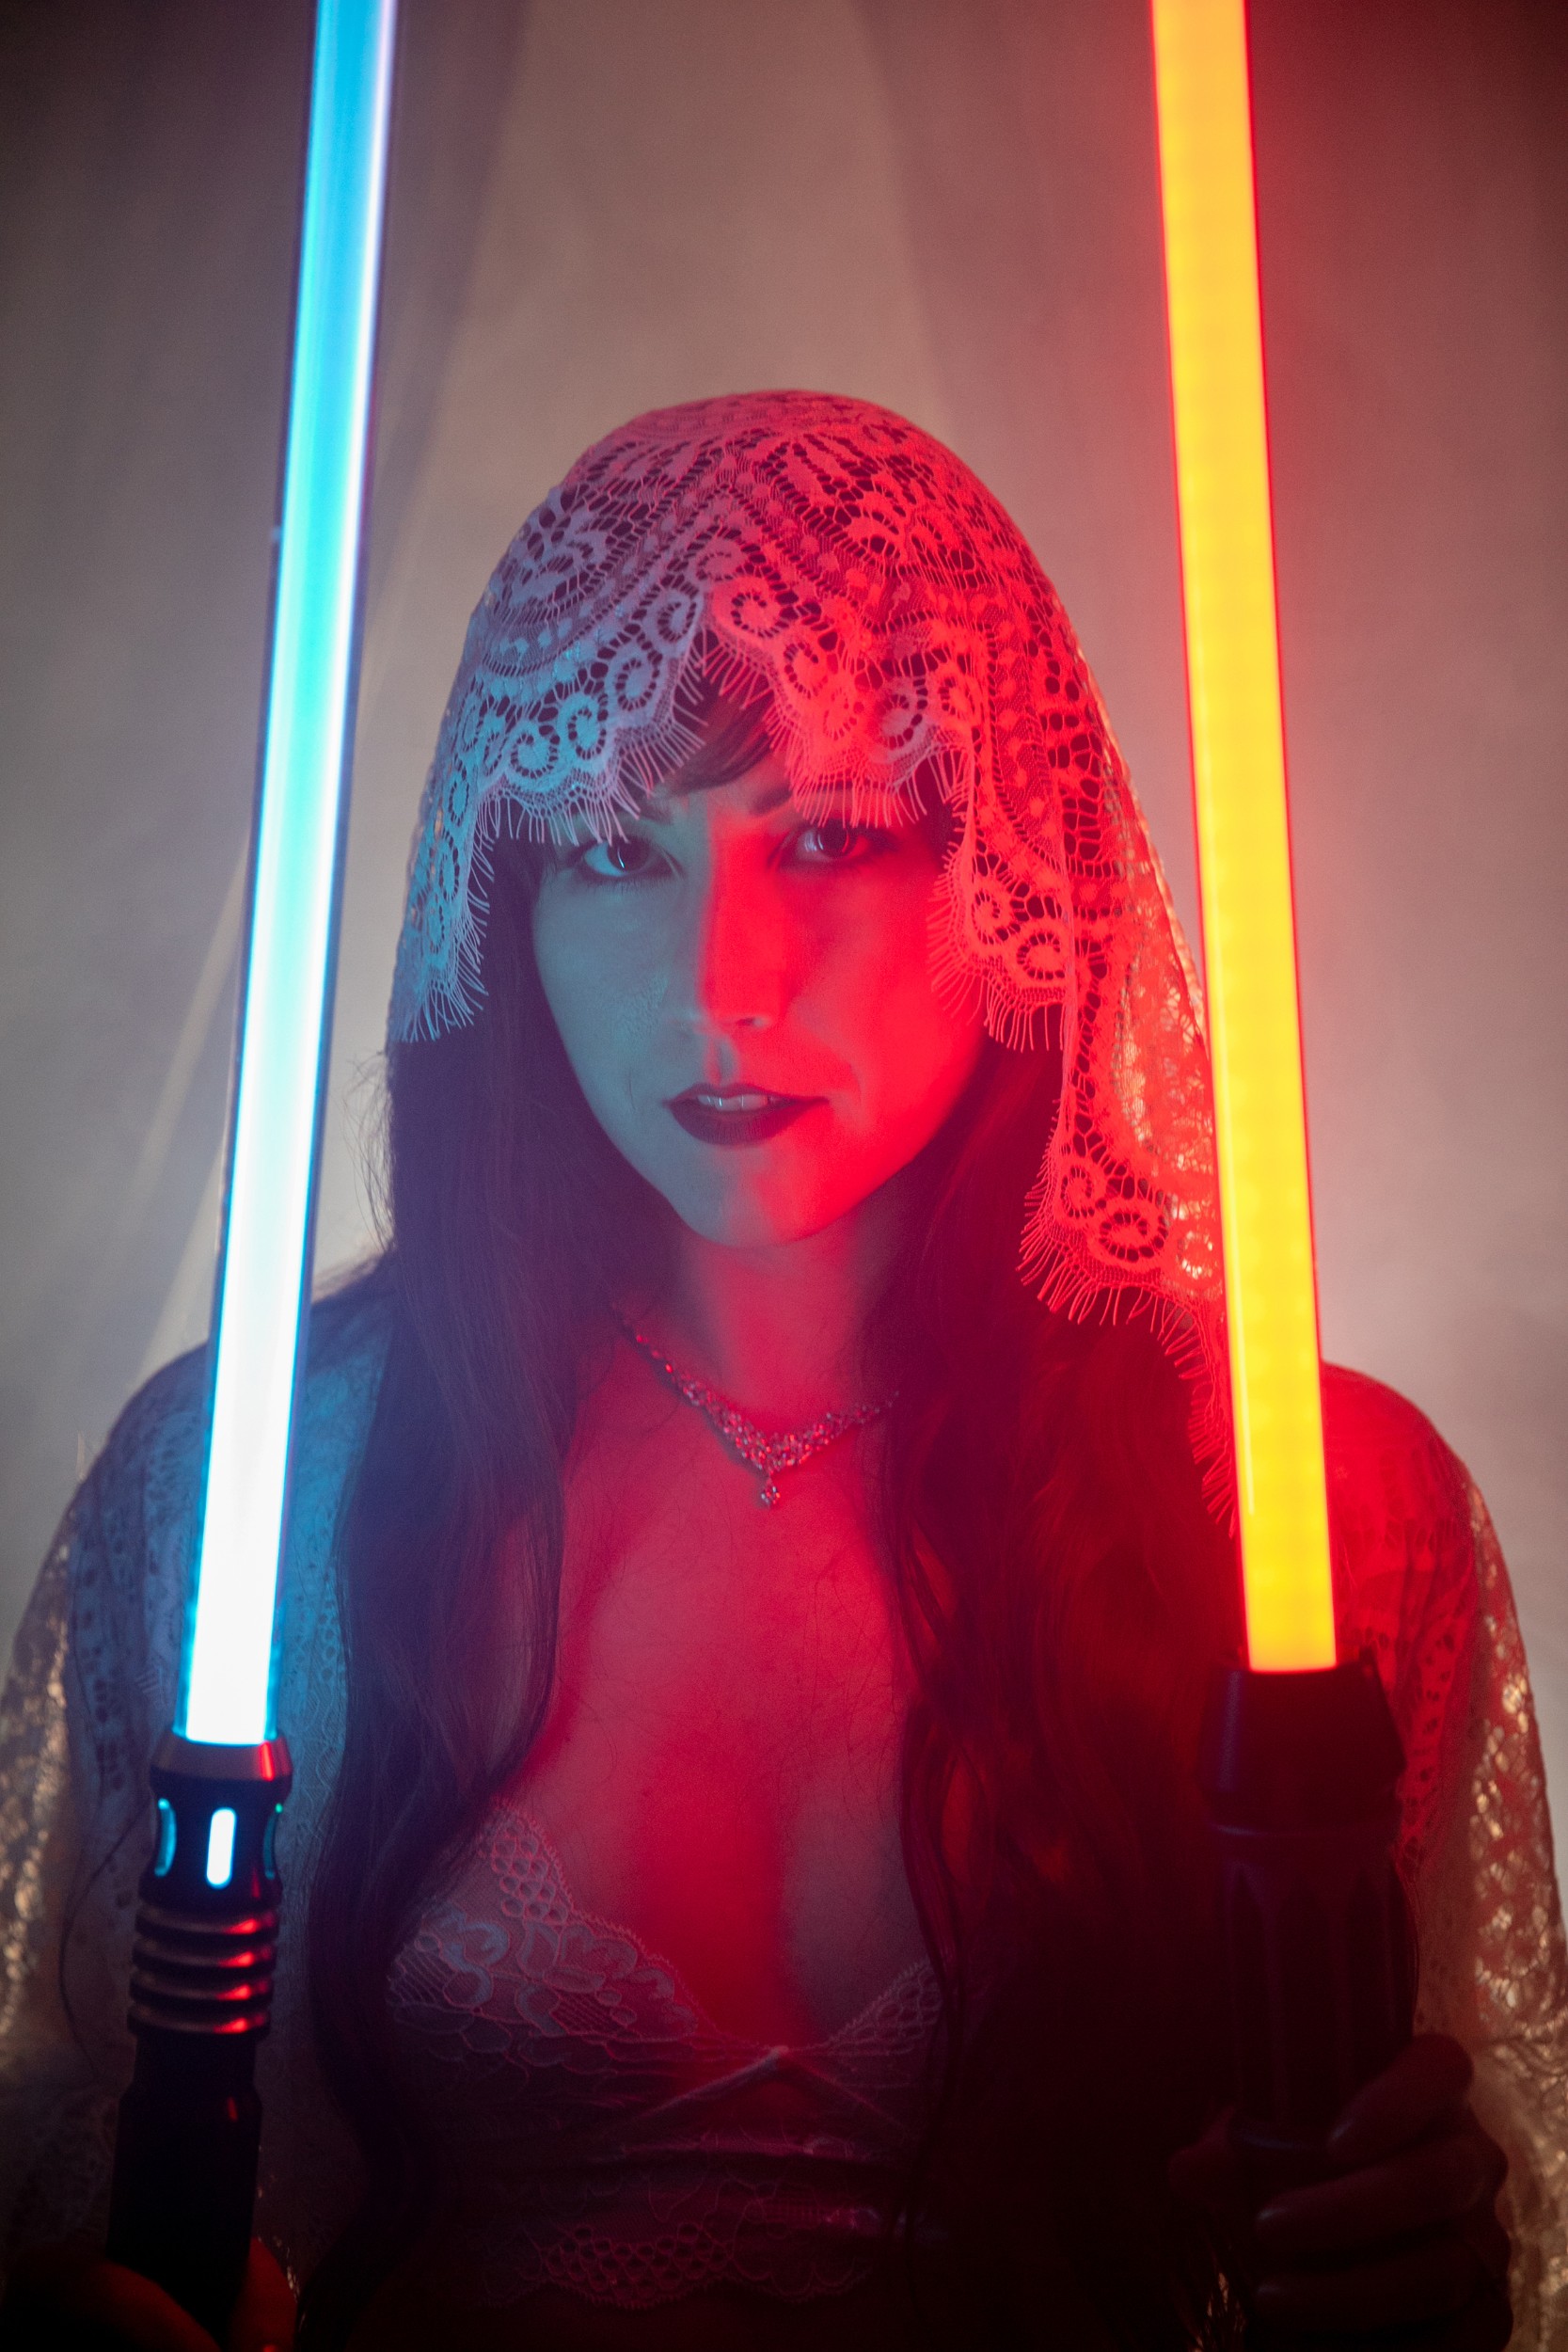 portrait of a woman wearing lace adornment holding two lightsabers